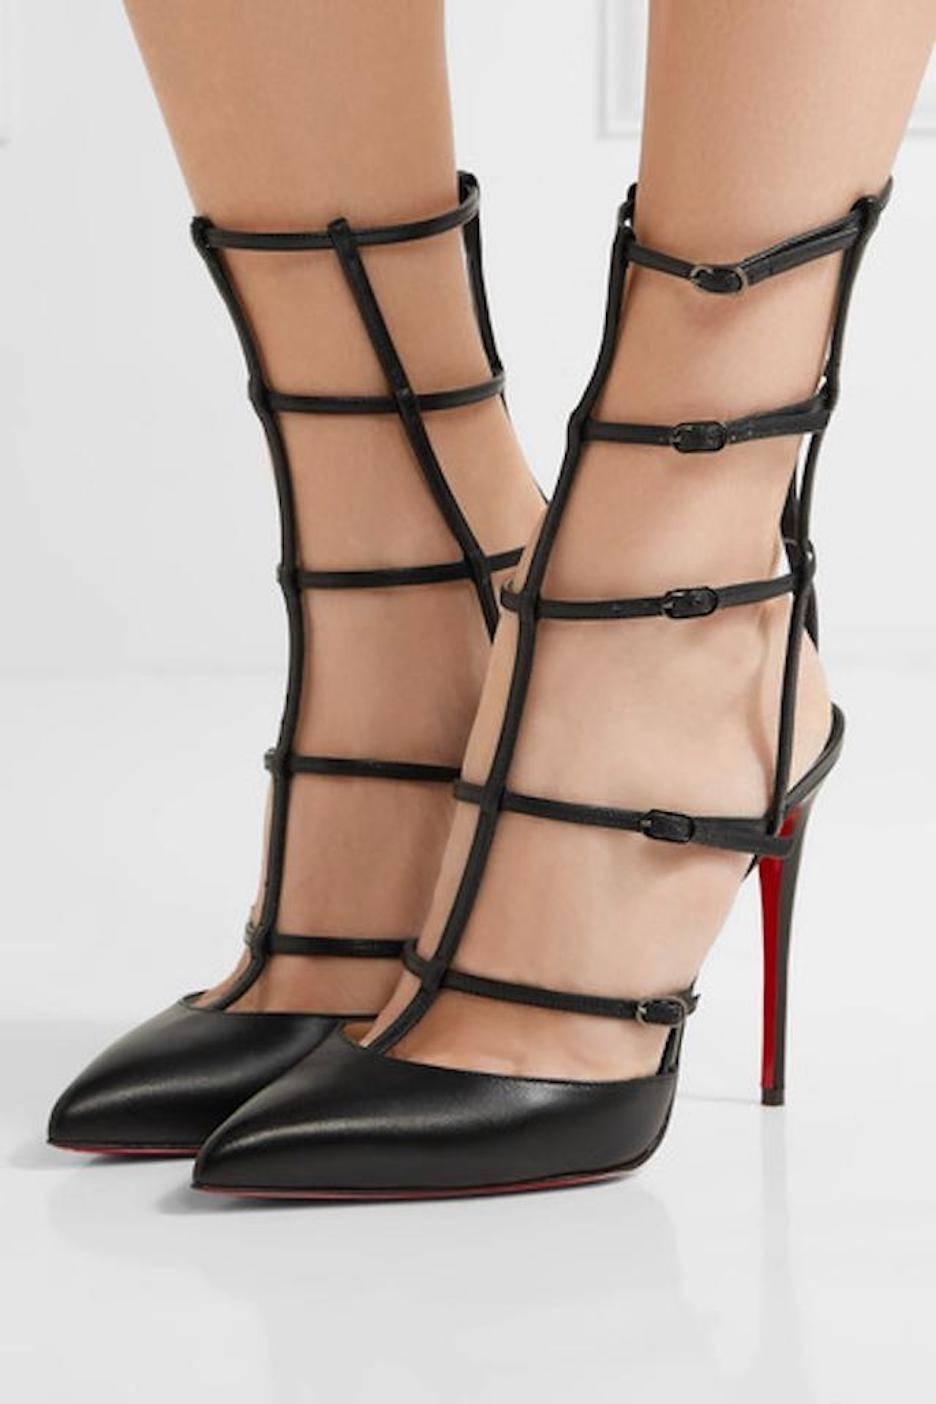 Christian Louboutin New Black Leather Cage Evening Sandals Heels Booties in Box In New Condition In Chicago, IL